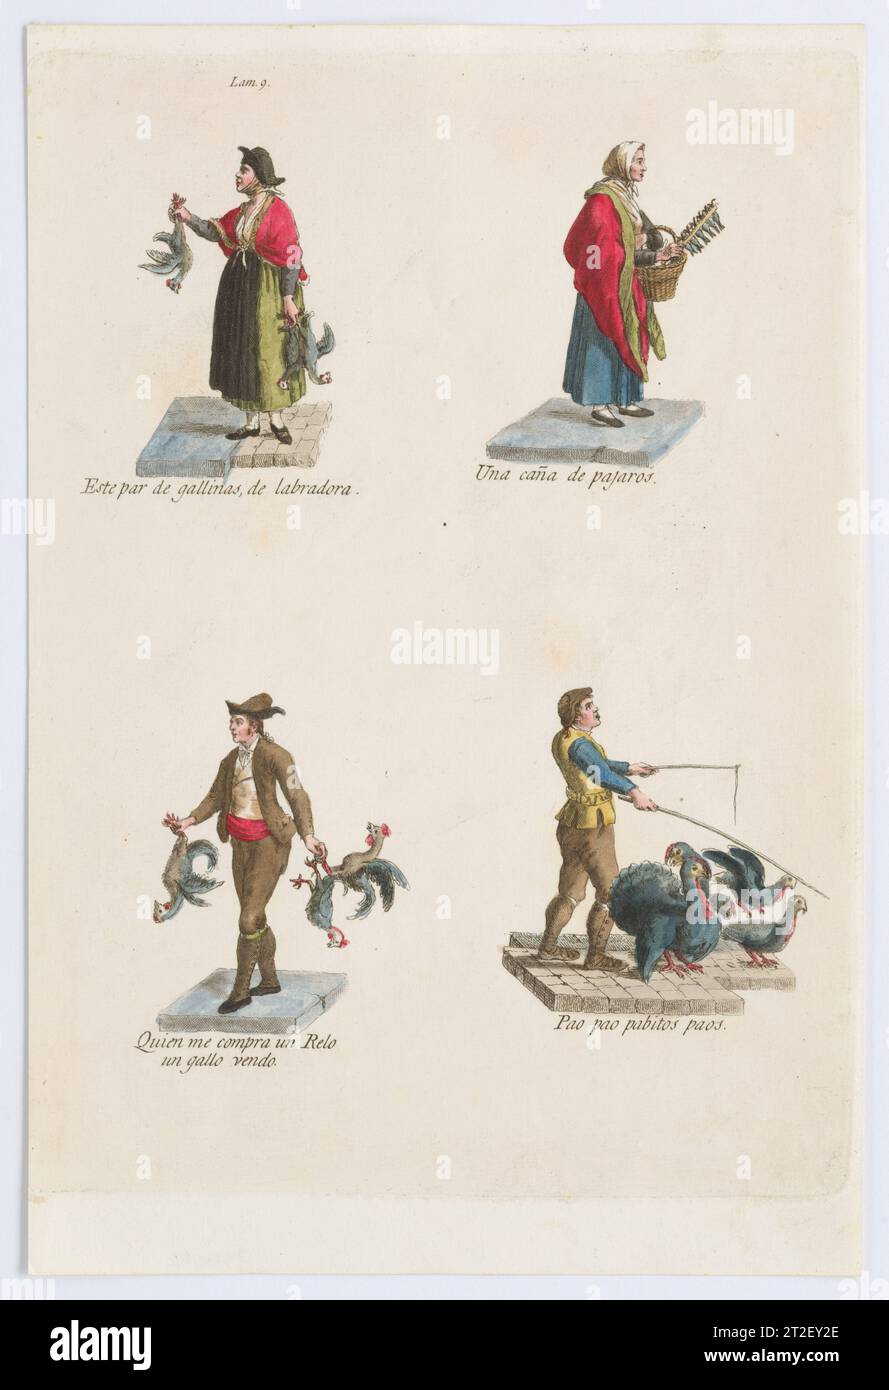 Plate 9: four street vendors from Madrid selling different kinds of birds (chicken, turkey, etc), from 'Los Gritos de Madrid' (The Cries of Madrid) Miguel Gamborino Spanish Publisher Imprenta Real, Madrid Spanish 1809–17 See comment for 2022.53. View more. Plate 9: four street vendors from Madrid selling different kinds of birds (chicken, turkey, etc), from 'Los Gritos de Madrid' (The Cries of Madrid). Miguel Gamborino (Spanish, Valencia 1760–1828 Madrid). 1809–17. Engraving with hand coloring. Imprenta Real, Madrid. Prints Stock Photo